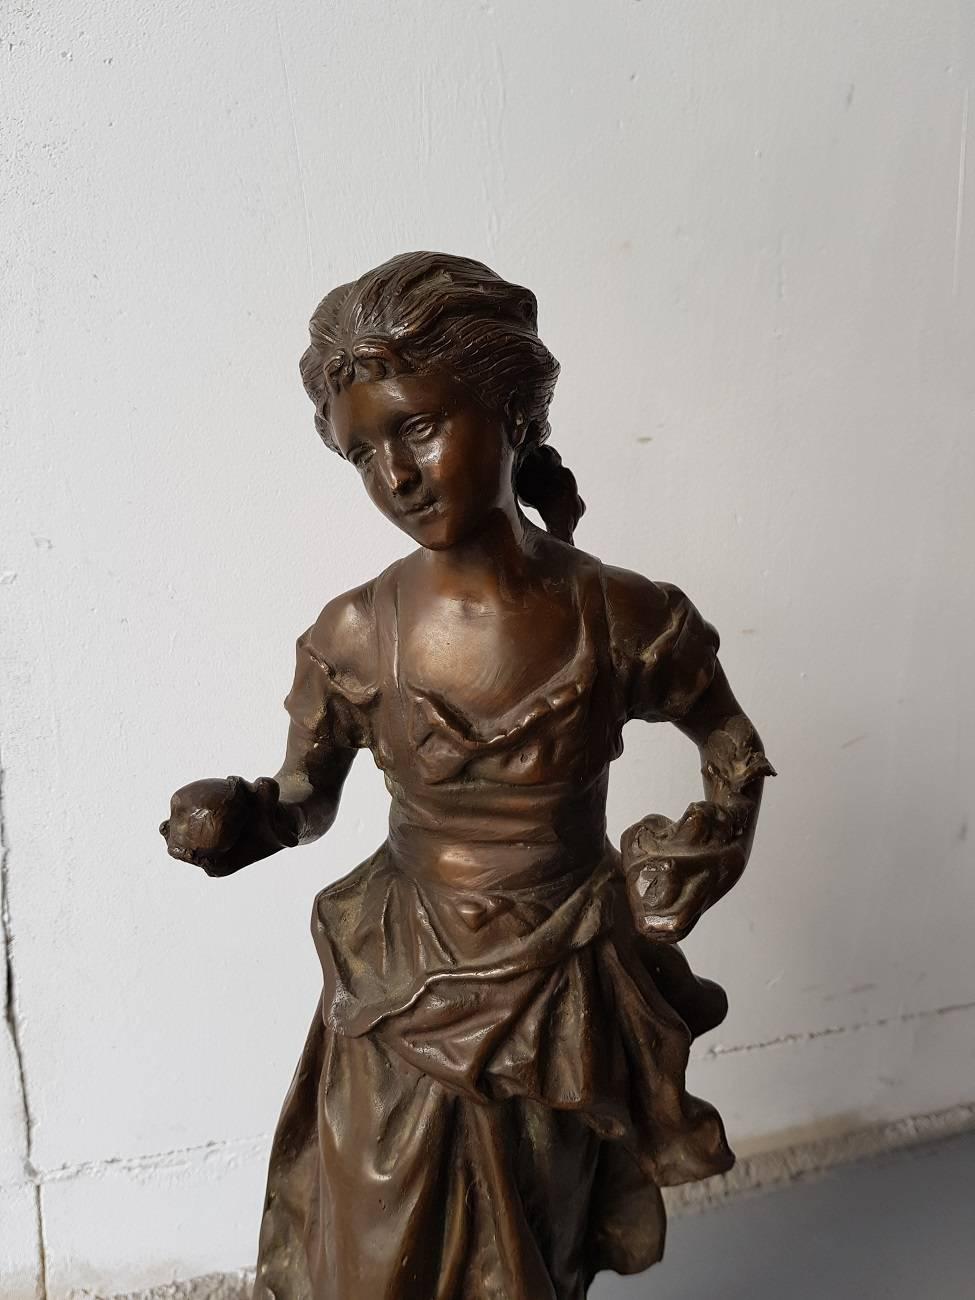 Bronze sculpture from circa 1900 by Rancoulet E. (1870-1915) called 